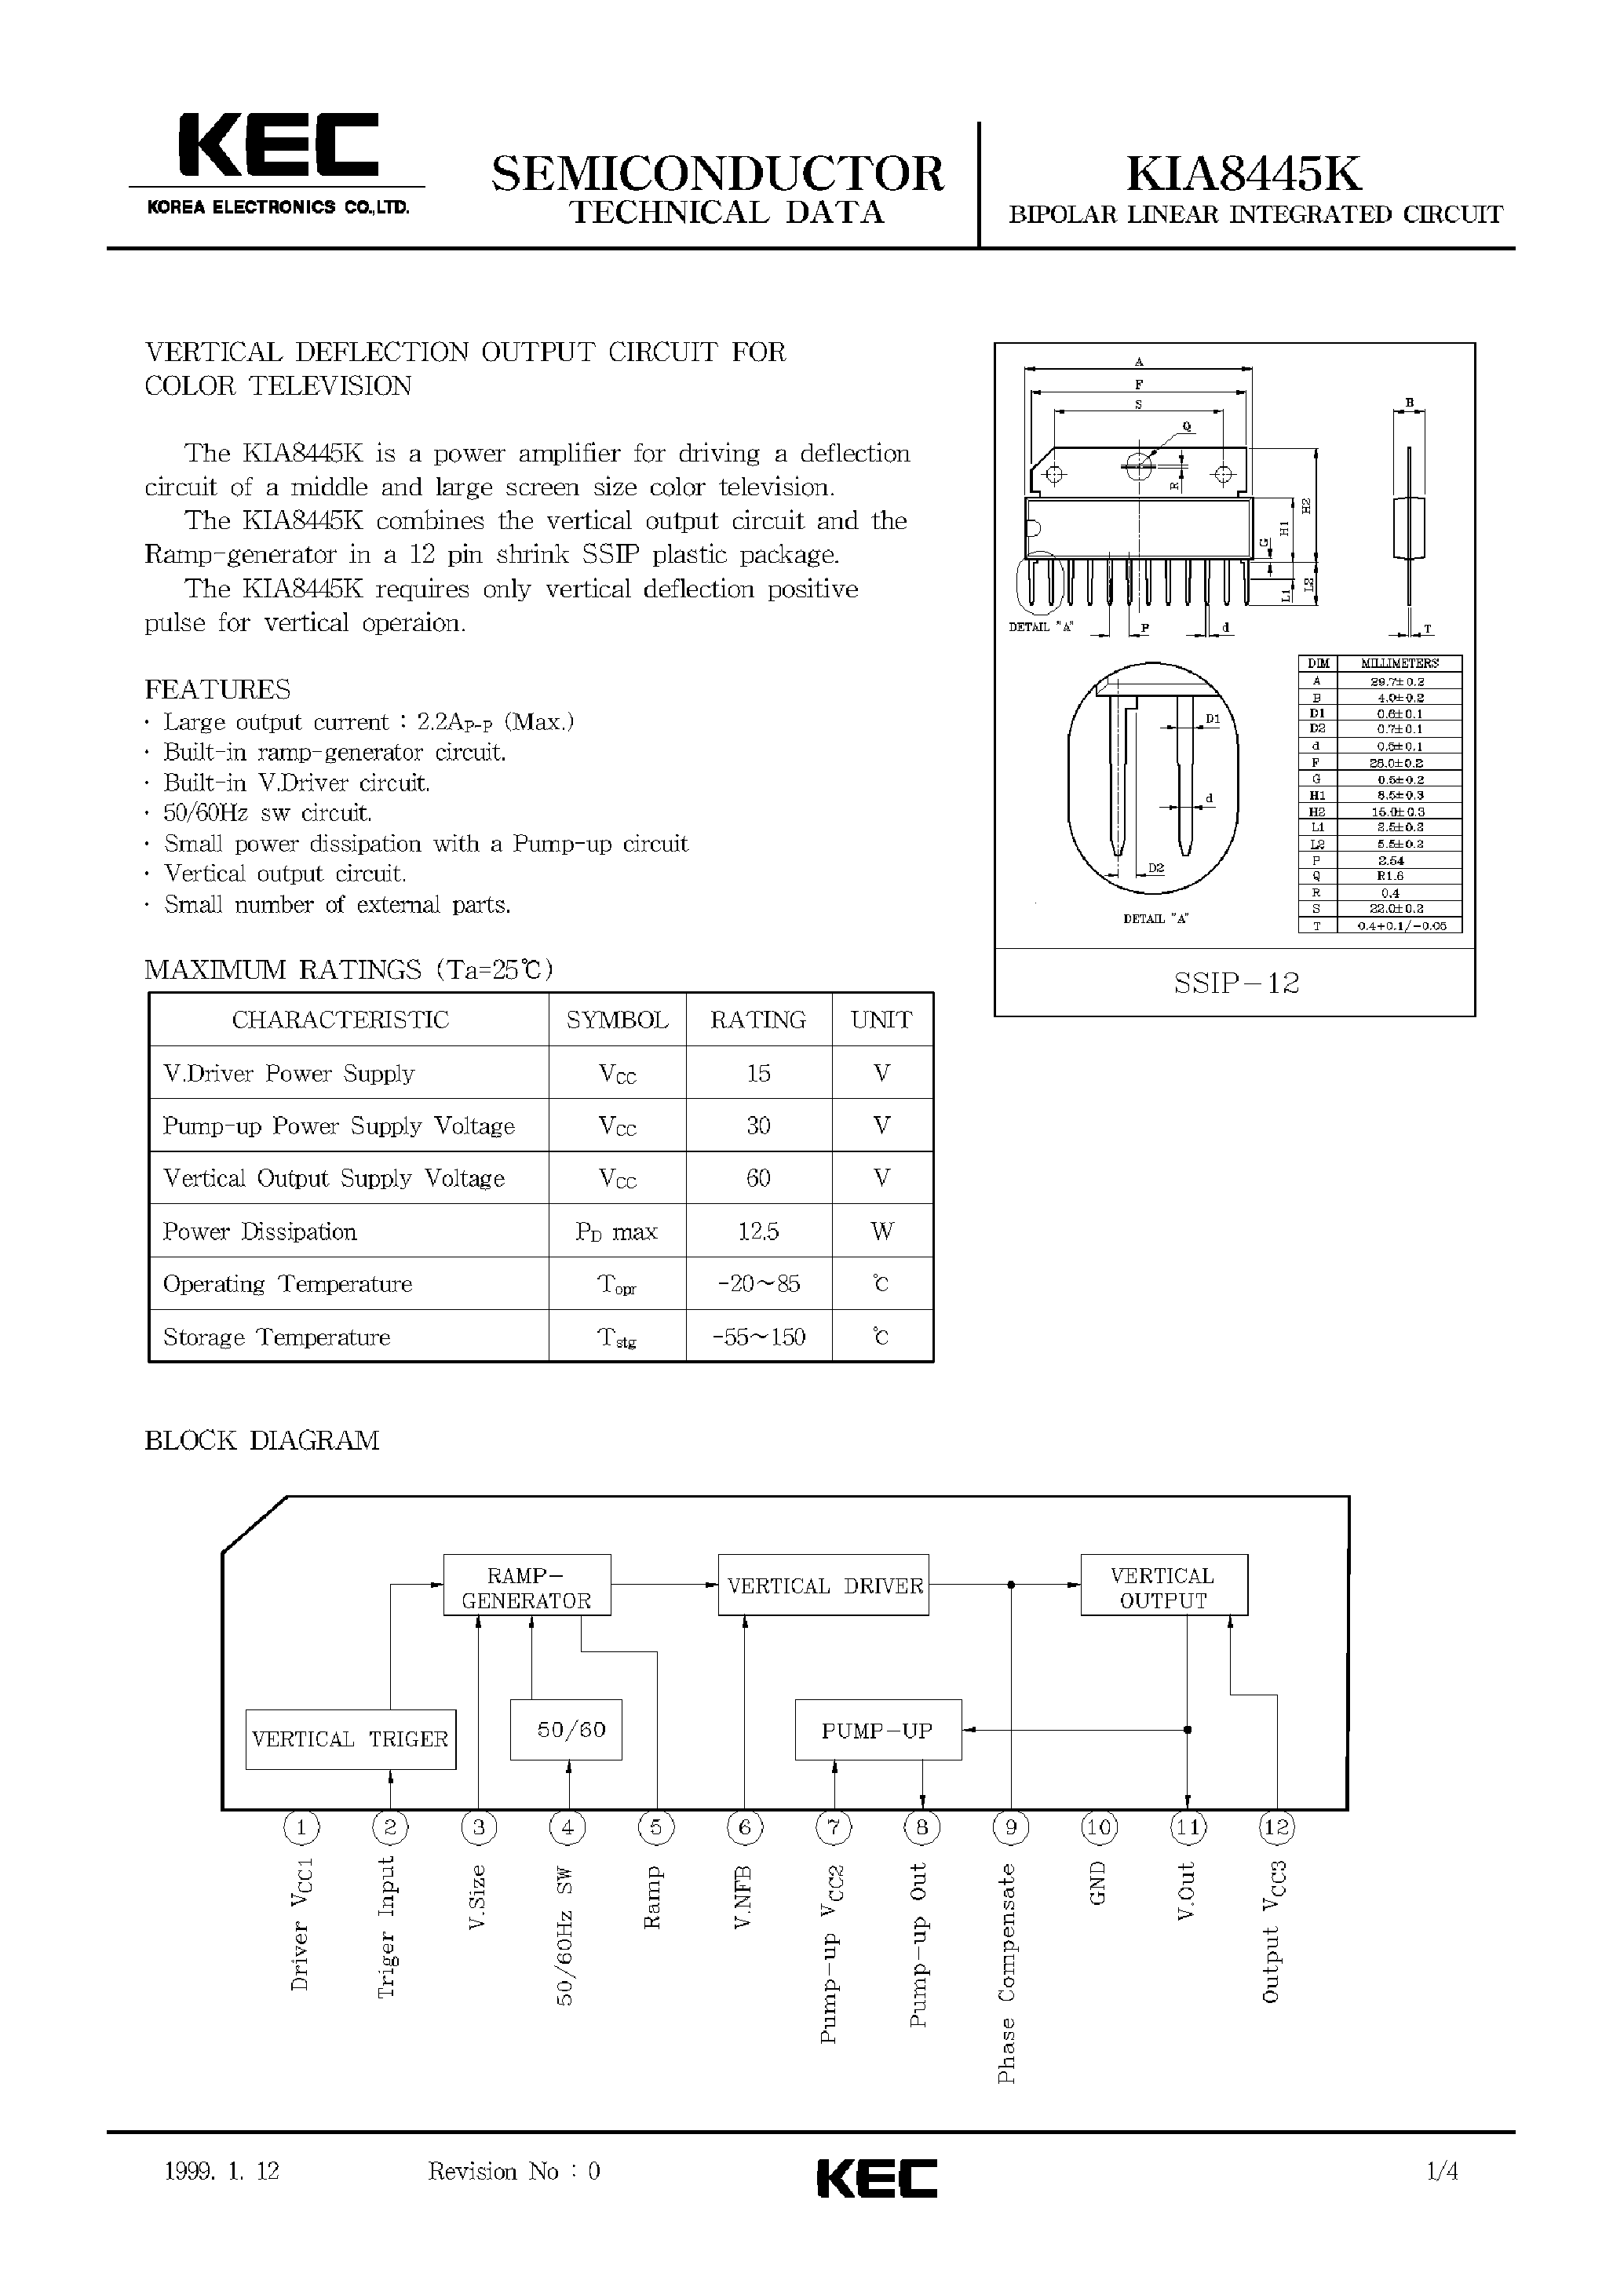 Datasheet KIA8445 - BIPOLAR LINEAR INTEGRATED CIRCUIT (VERTICAL DEFLECTION OUTPUT CIRCUIT FOR COLOR TELEVISION) page 1